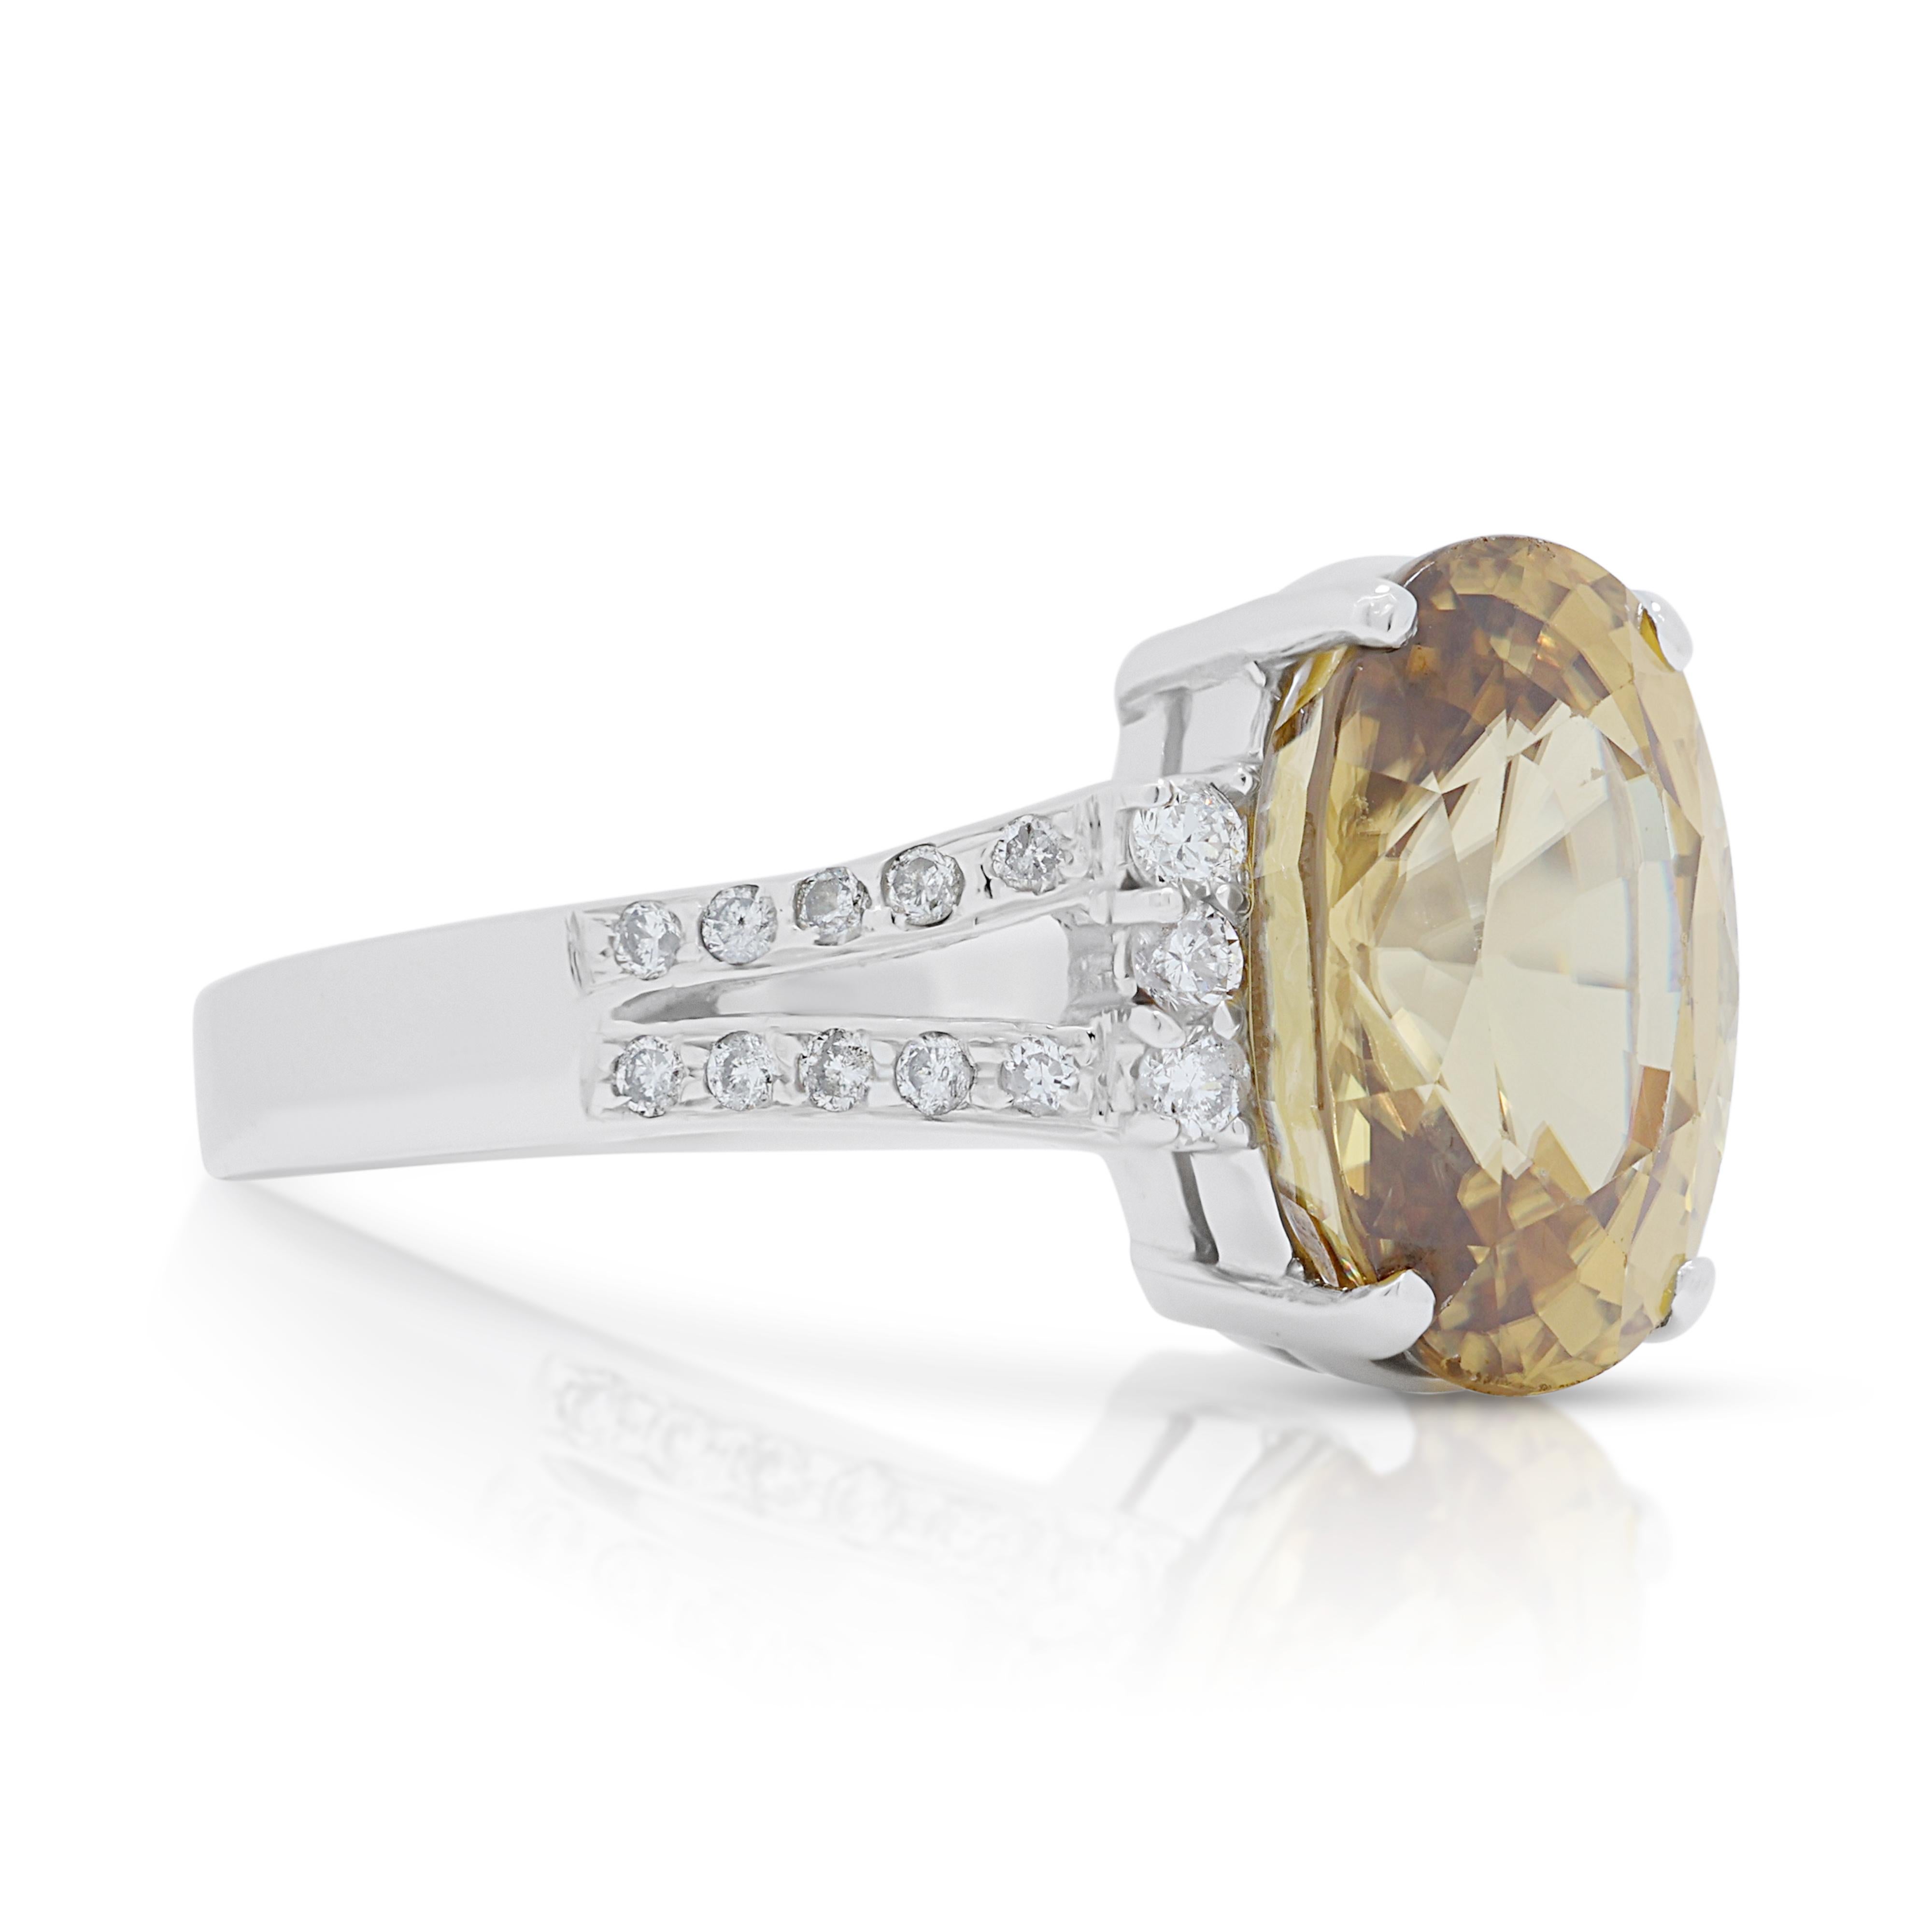 Fascinating 4.20ct Citrine Pave Ring in 18K White Gold  In Excellent Condition For Sale In רמת גן, IL